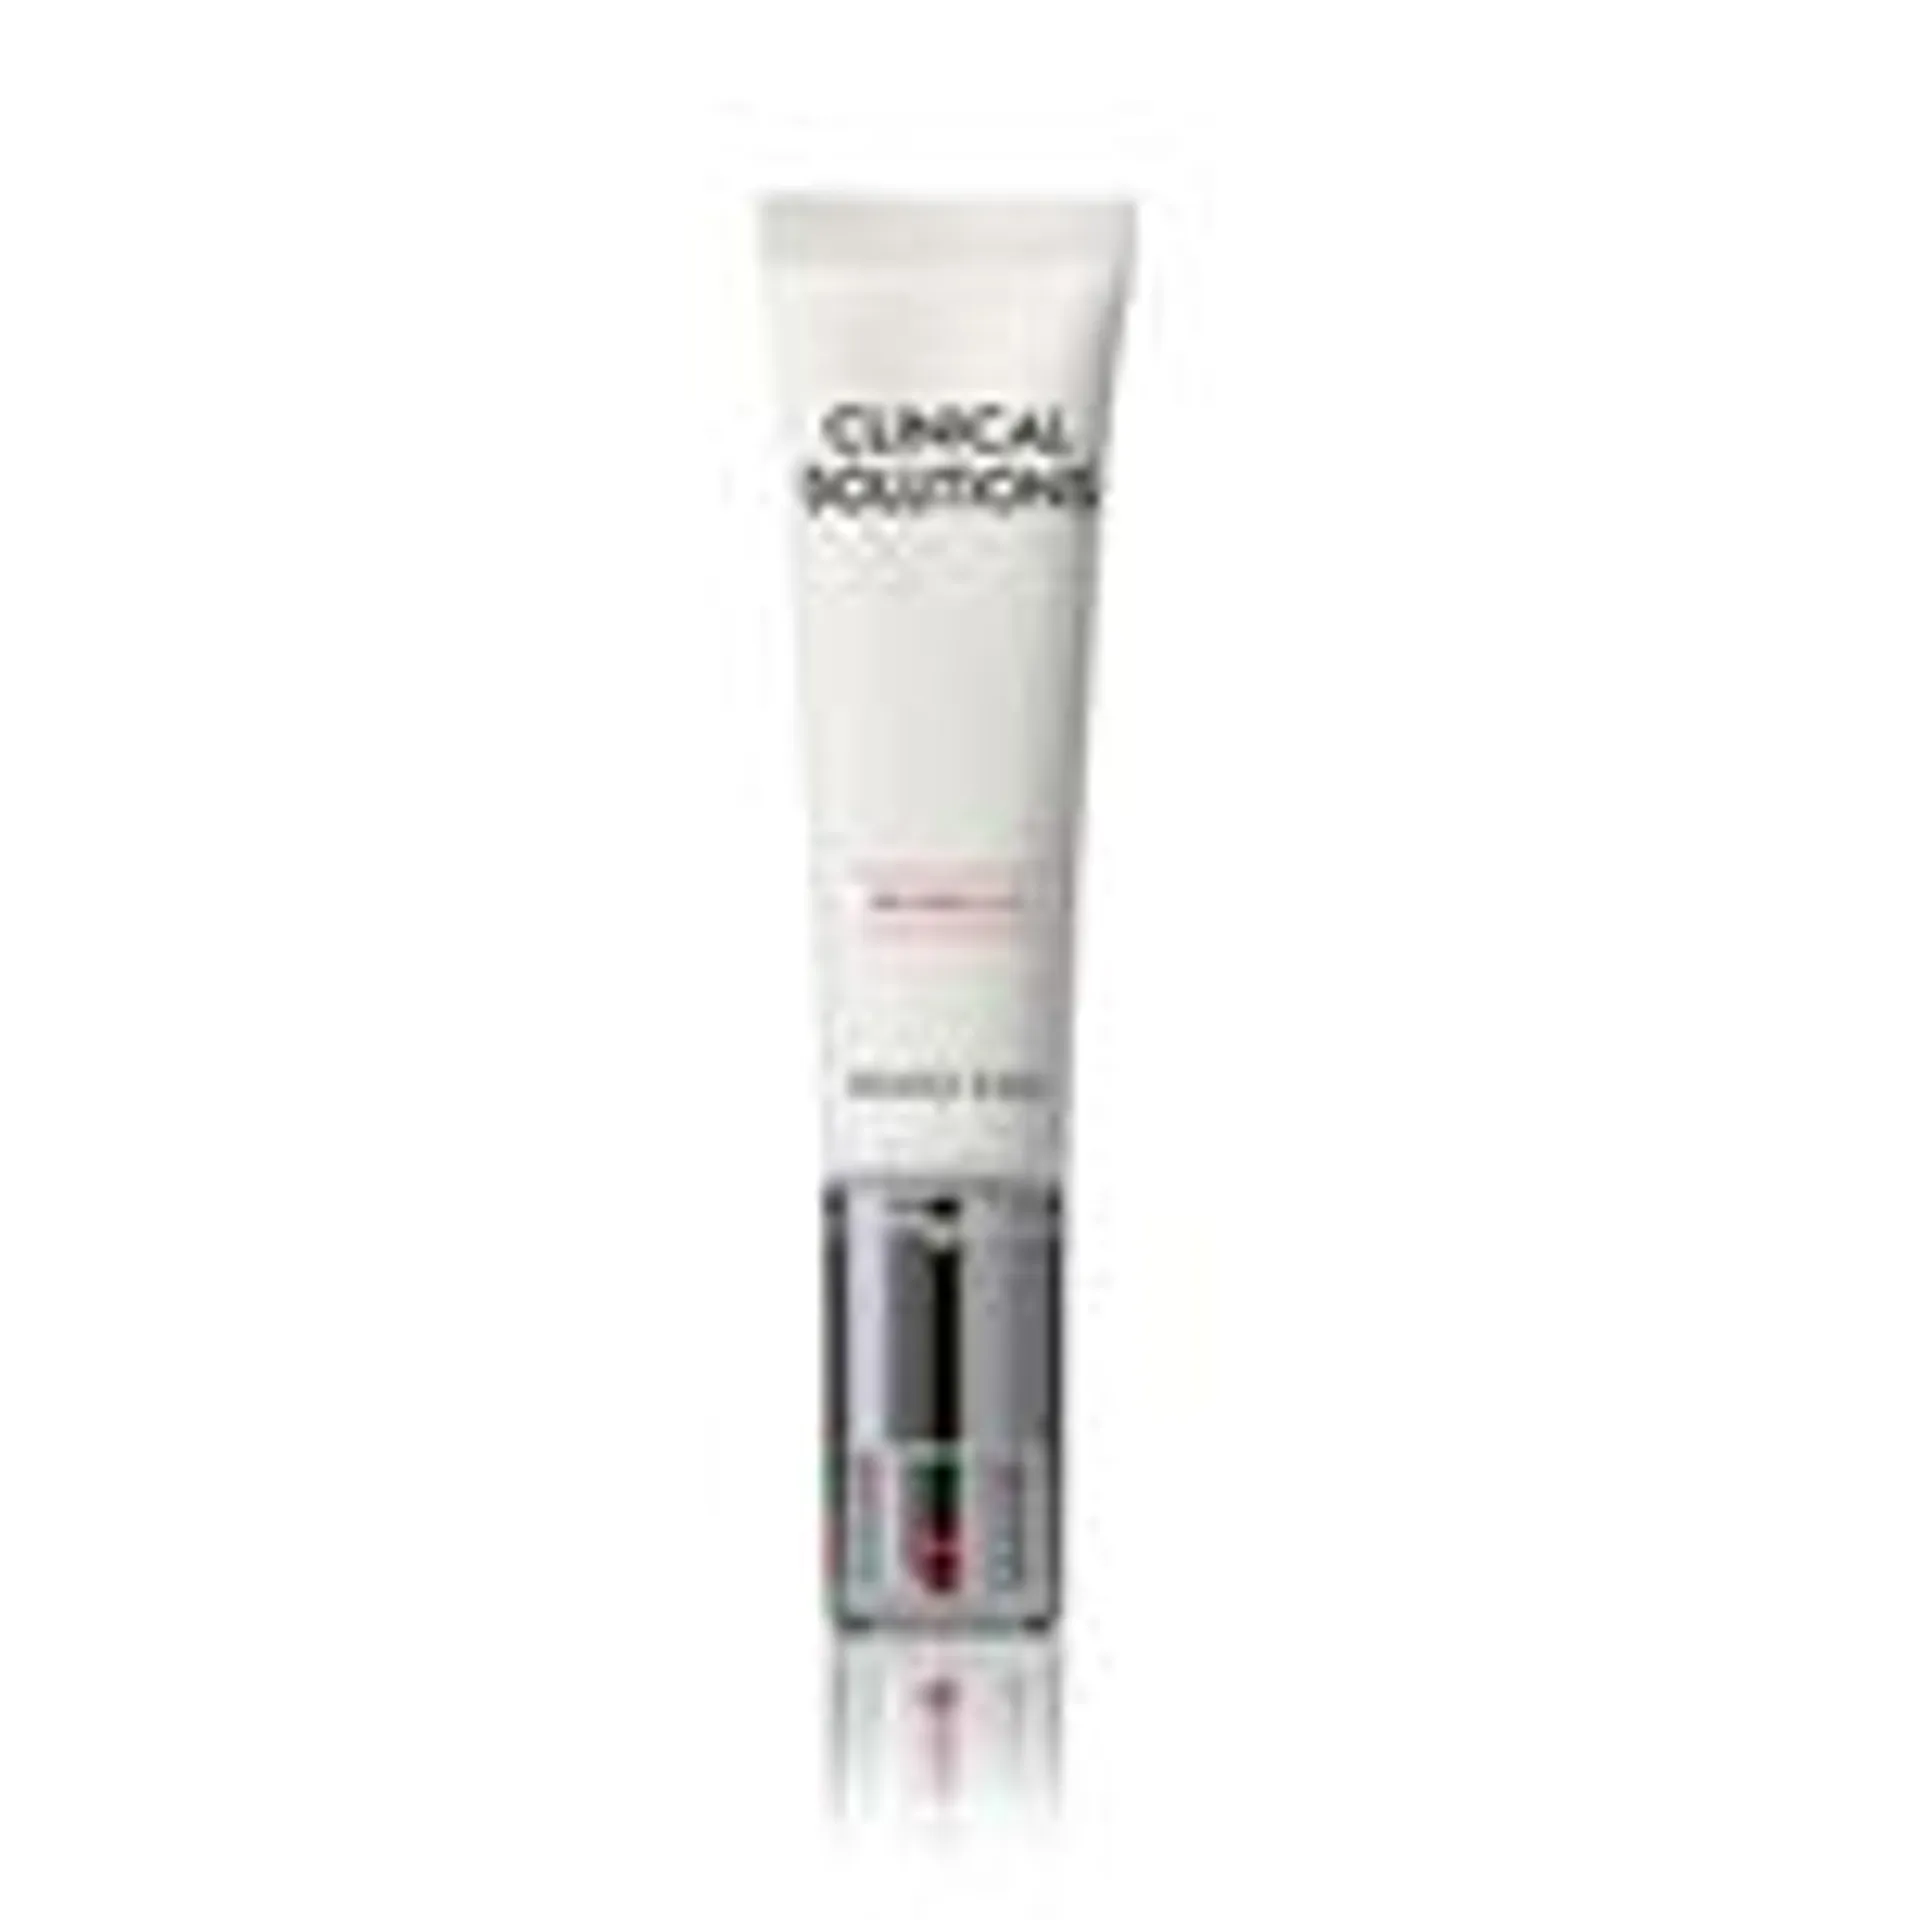 Mary Kay Clinical Solutions™ Retinol 0.5